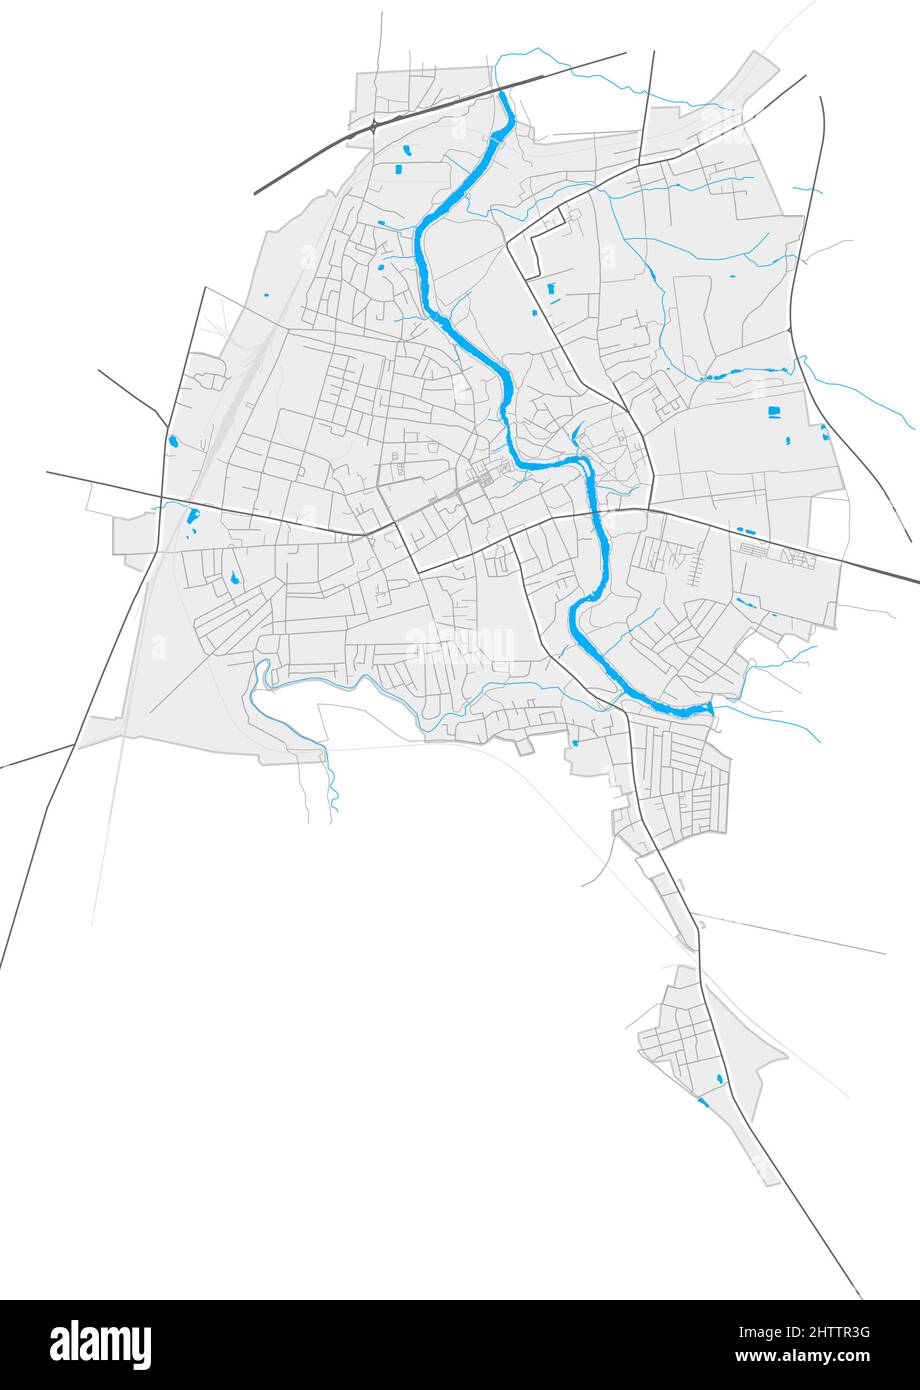 Novohrad-Volynskyi, Zhytomyr Oblast, Ukraine high resolution vector map with city boundaries and outlined paths. White additional outlines for main ro Stock Vector